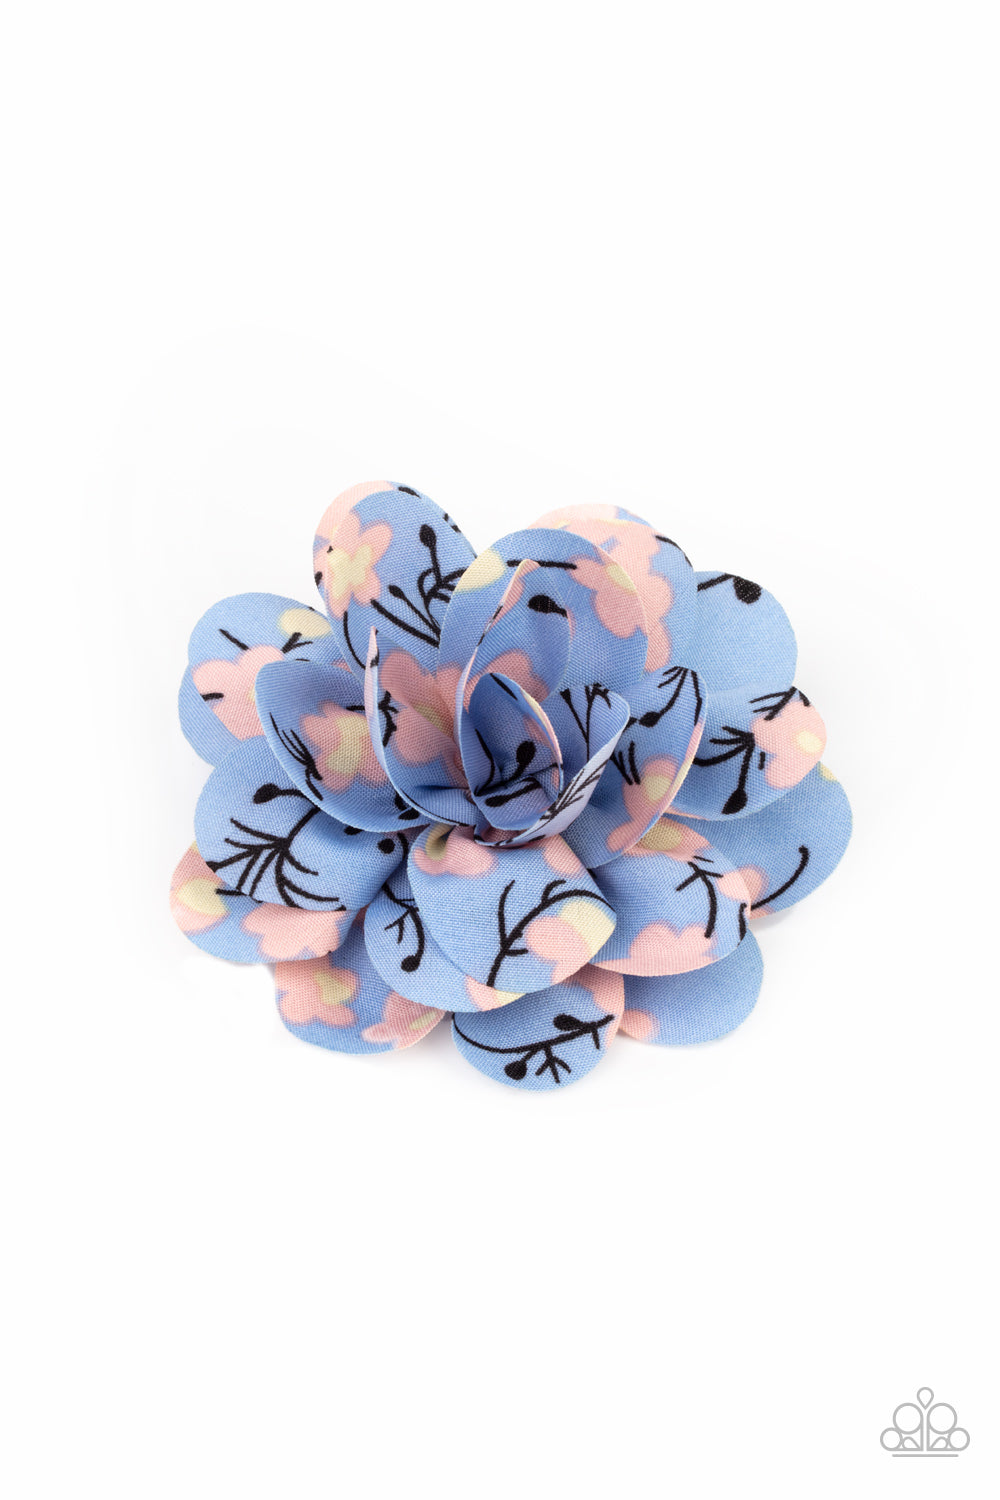 Springtime Eden Blue Hair Clip - Paparazzi Accessories  Plush blue petals are printed in a colorful blossom pattern as they gather into a whimsical springtime flower. Features a standard hair clip on the back.  All Paparazzi Accessories are lead free and nickel free!  Sold as one individual hair clip.